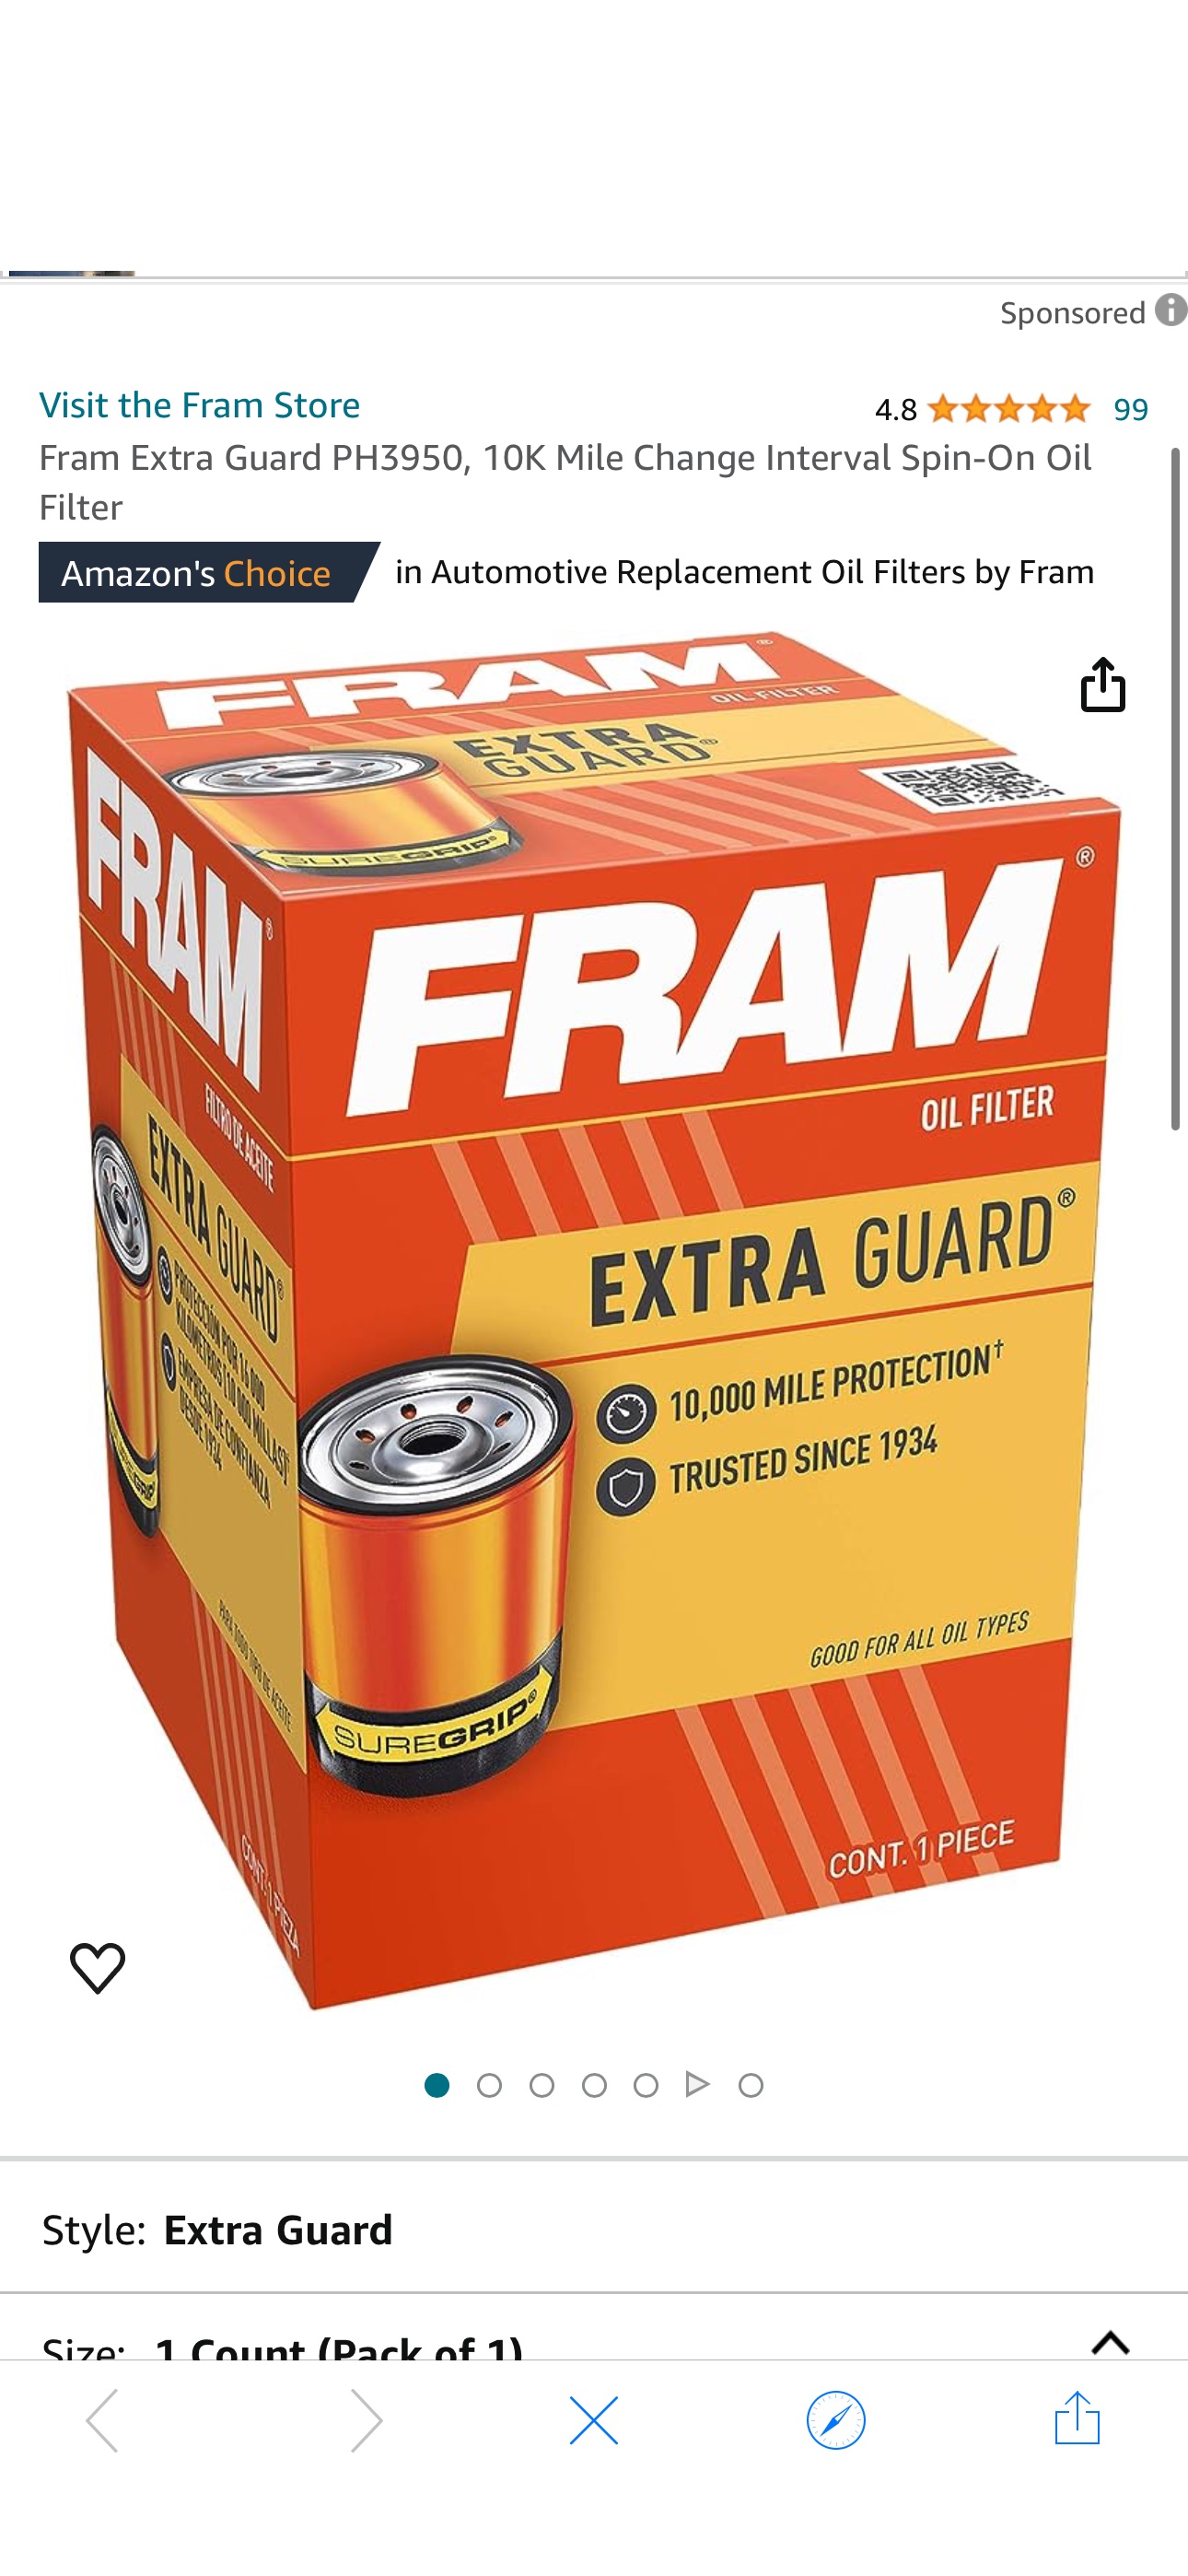 Amazon.com: Fram Extra Guard PH3950, 10K Mile Change Interval Spin-On Oil Filter : Automotive